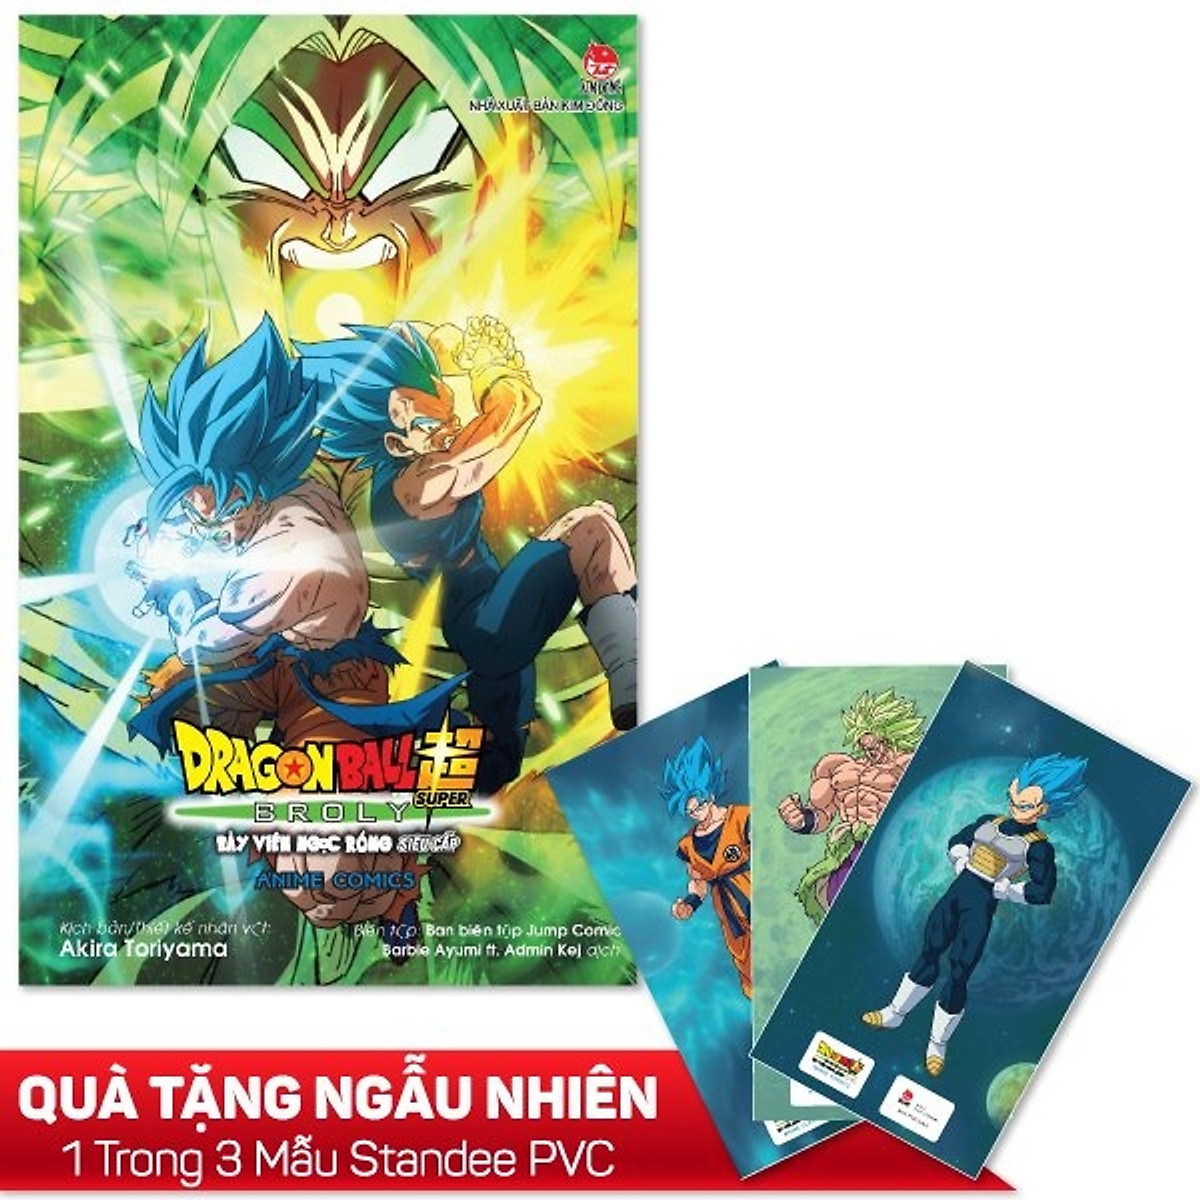 Dragonball Z png images | PNGEgg